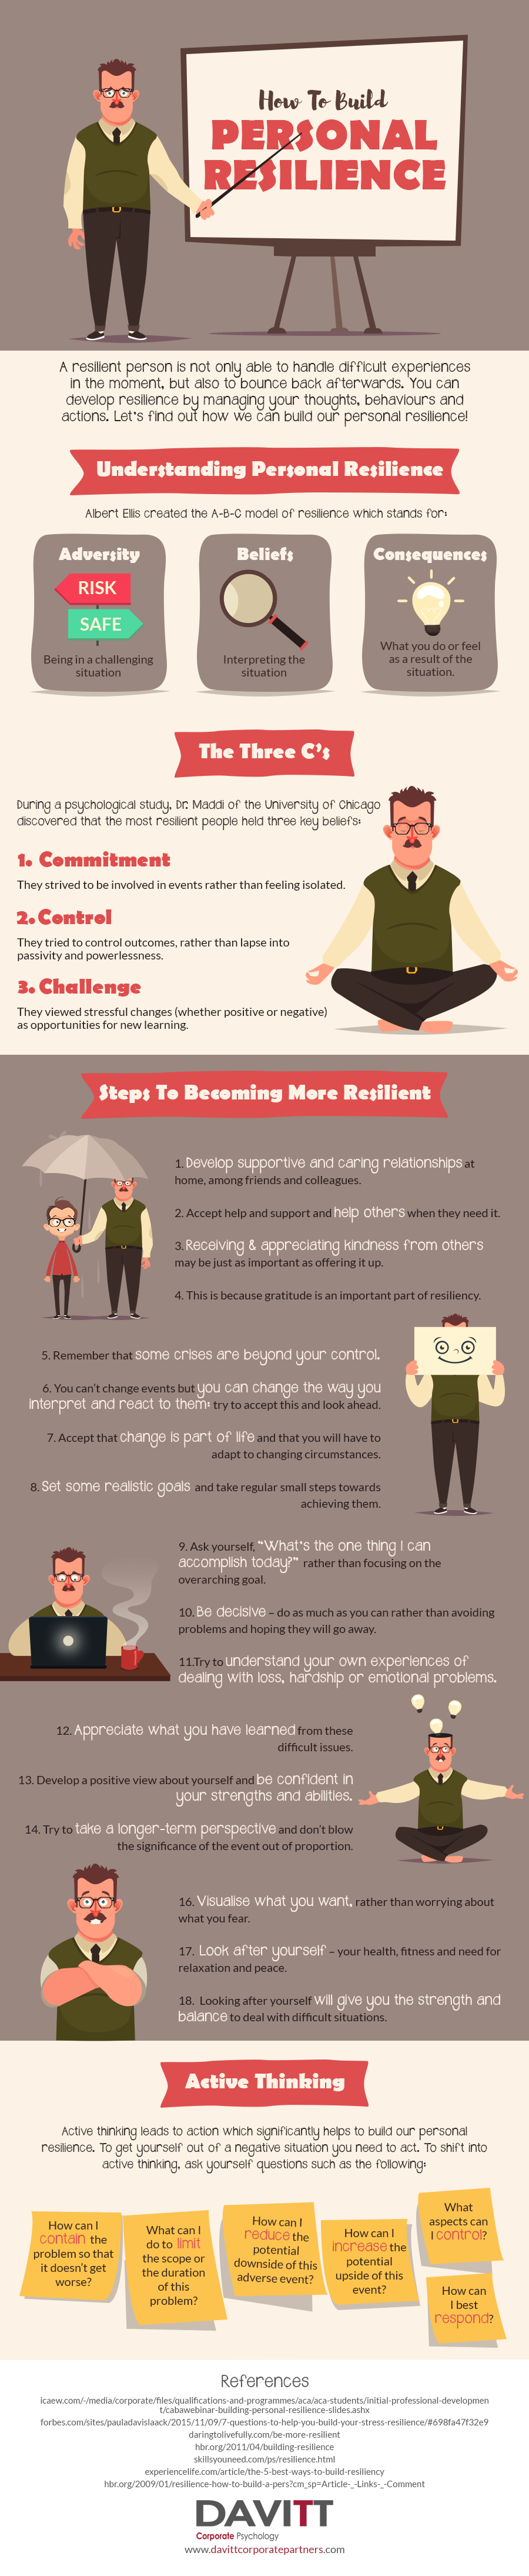 Alt text: An infographic about developing resilience